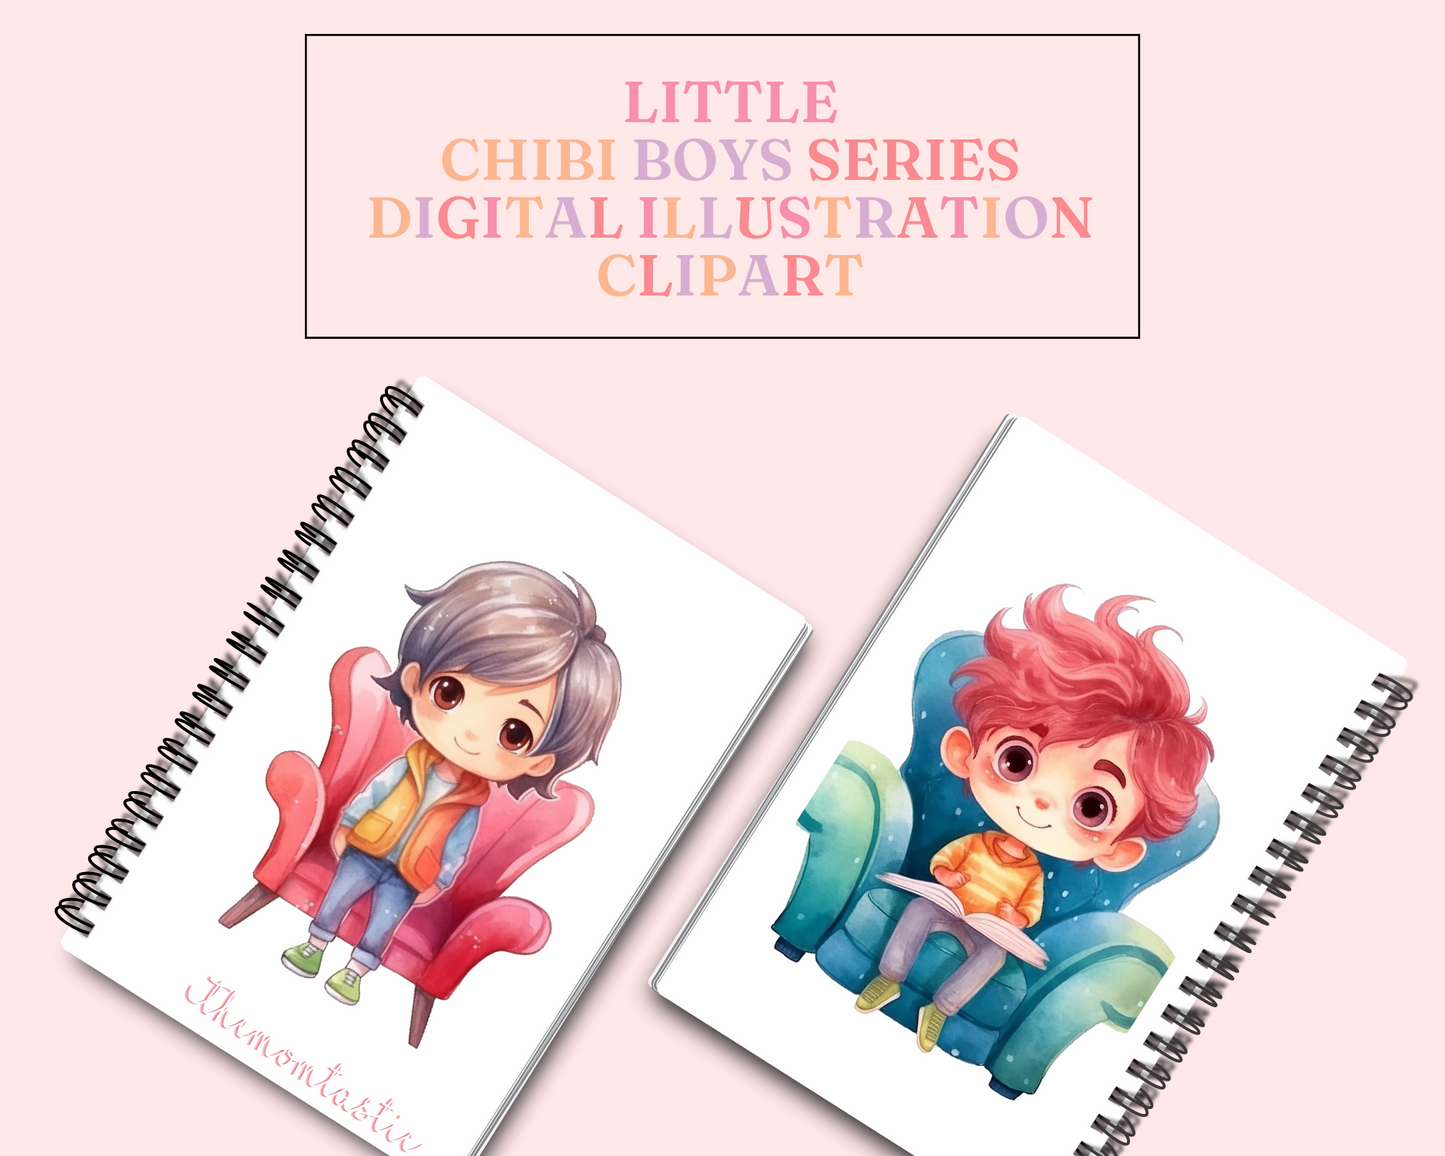 Cute Little Chibi Boys – High-Quality PNG - Transparent Background - Commercial Use